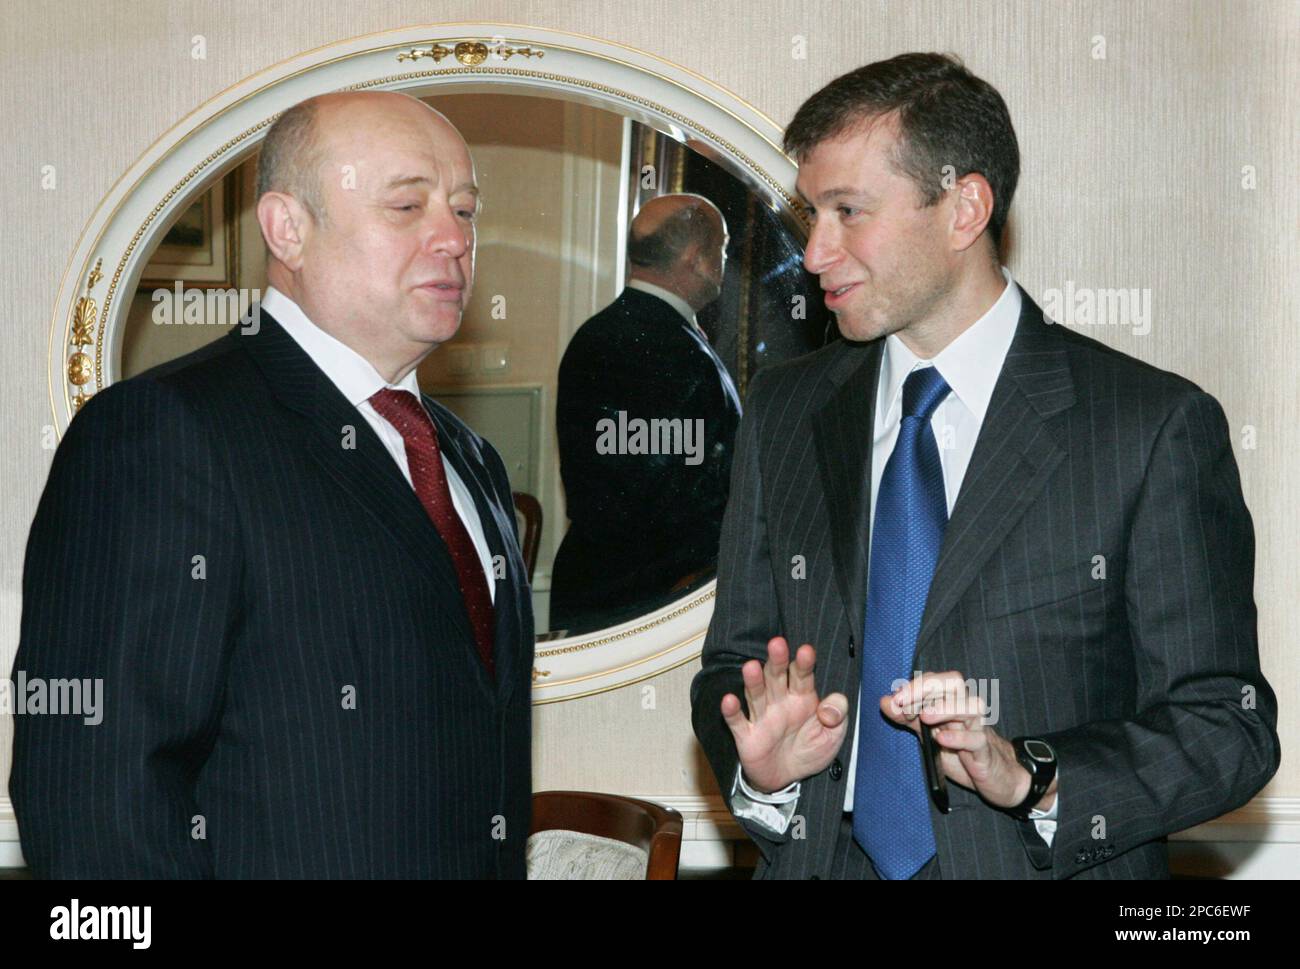 Russian Prime Minister Mikhail Fradkov, left, speaks with billionaire Roman Abramovich before a session of Russia's Security Council in the Moscow Kremlin, Wednesday, Dec. 20, 2006. Abramovich on Wednesday submitted his resignation as governor of the remote Far Eastern Chukotka region, an aide said. Abramovich was first elected governor of Chukotka six years ago and was appointed by Putin last year after direct elections of regional leaders were abolished.(AP Photo/ITAR-TASS/Presidential Press Service, Vladimir Rodinov) Stockfoto